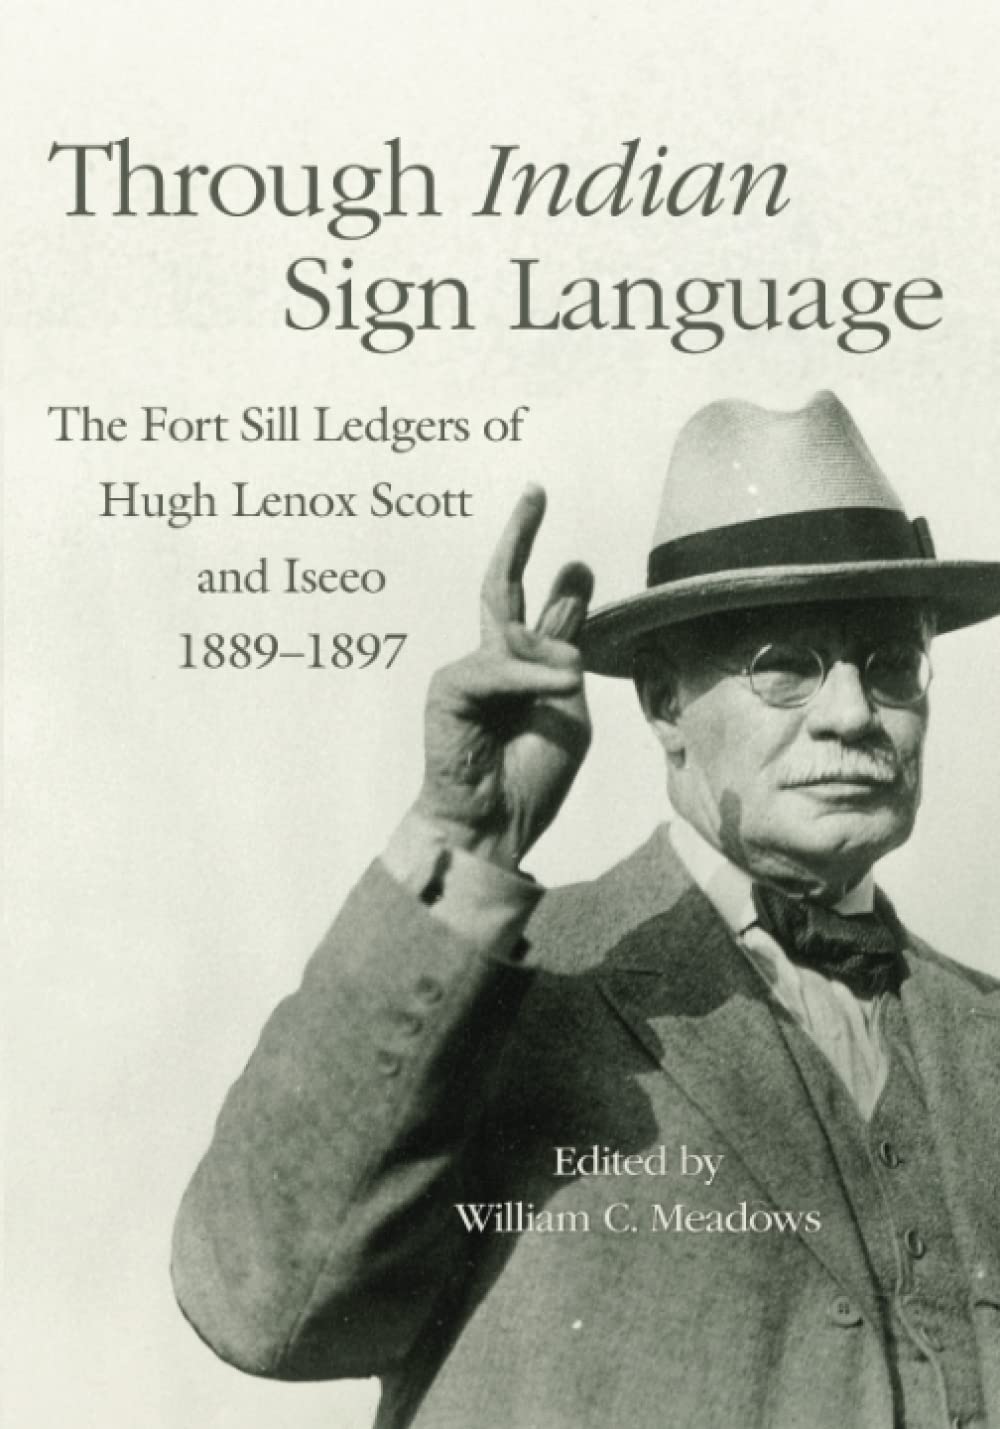 Through Indian Sign Language: The Fort Sill Ledgers of Hugh Lenox Scott and Iseeo, 1889-1897 edited by William C. Meadows